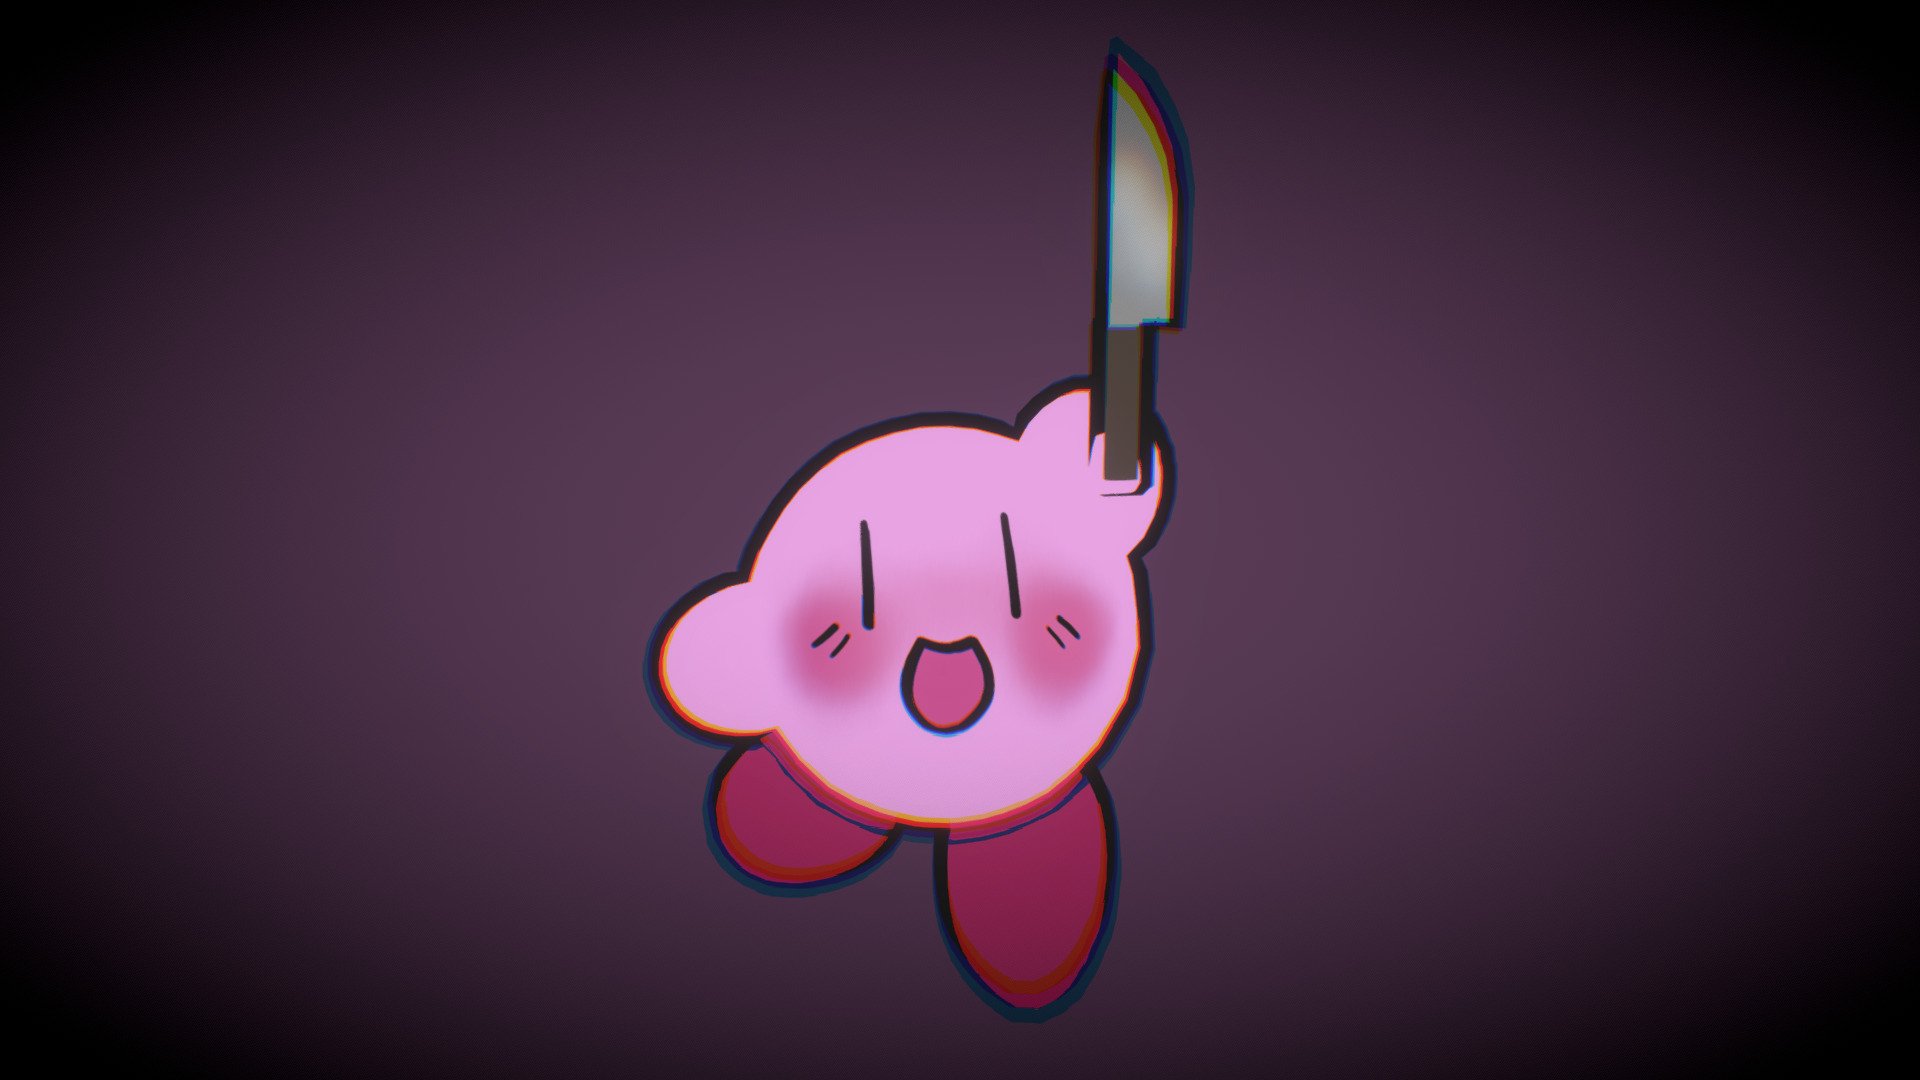 Knife Kirby - 3D model by Bloo_the_Fluff (@Bloo_the_Fluff) [5a06371]